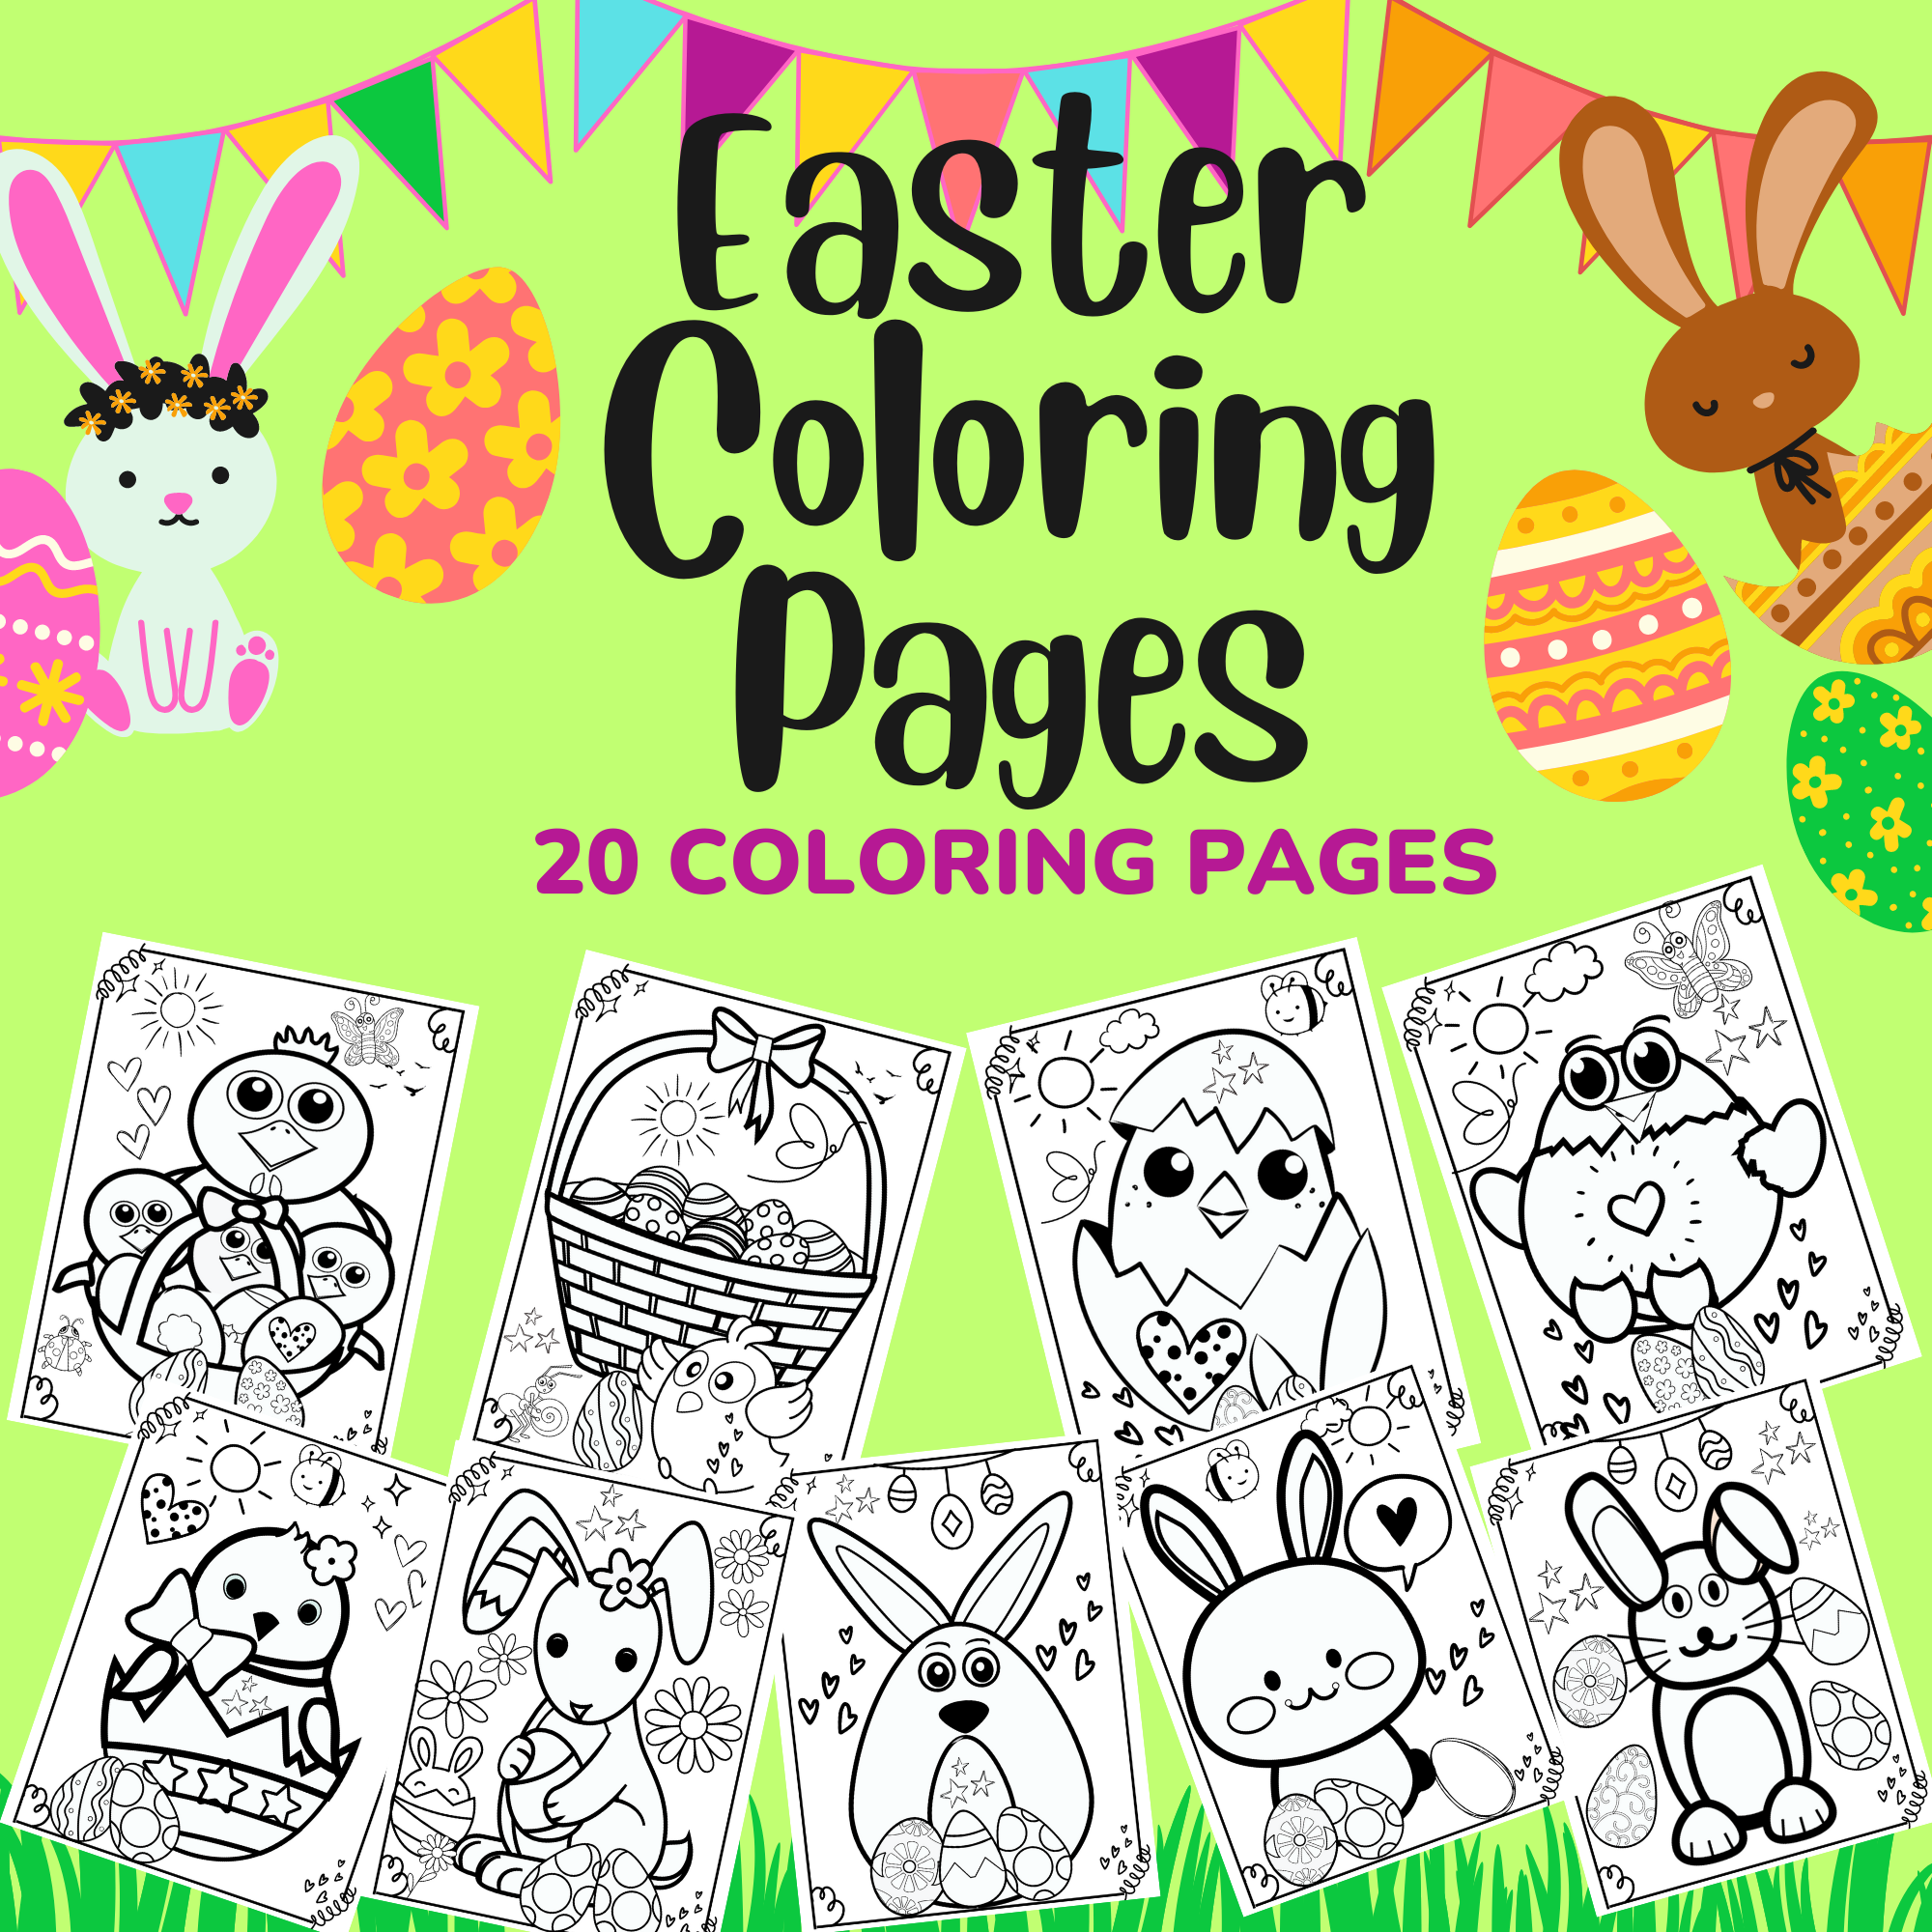 Spring and easter coloring pages fun coloring pages made by teachers